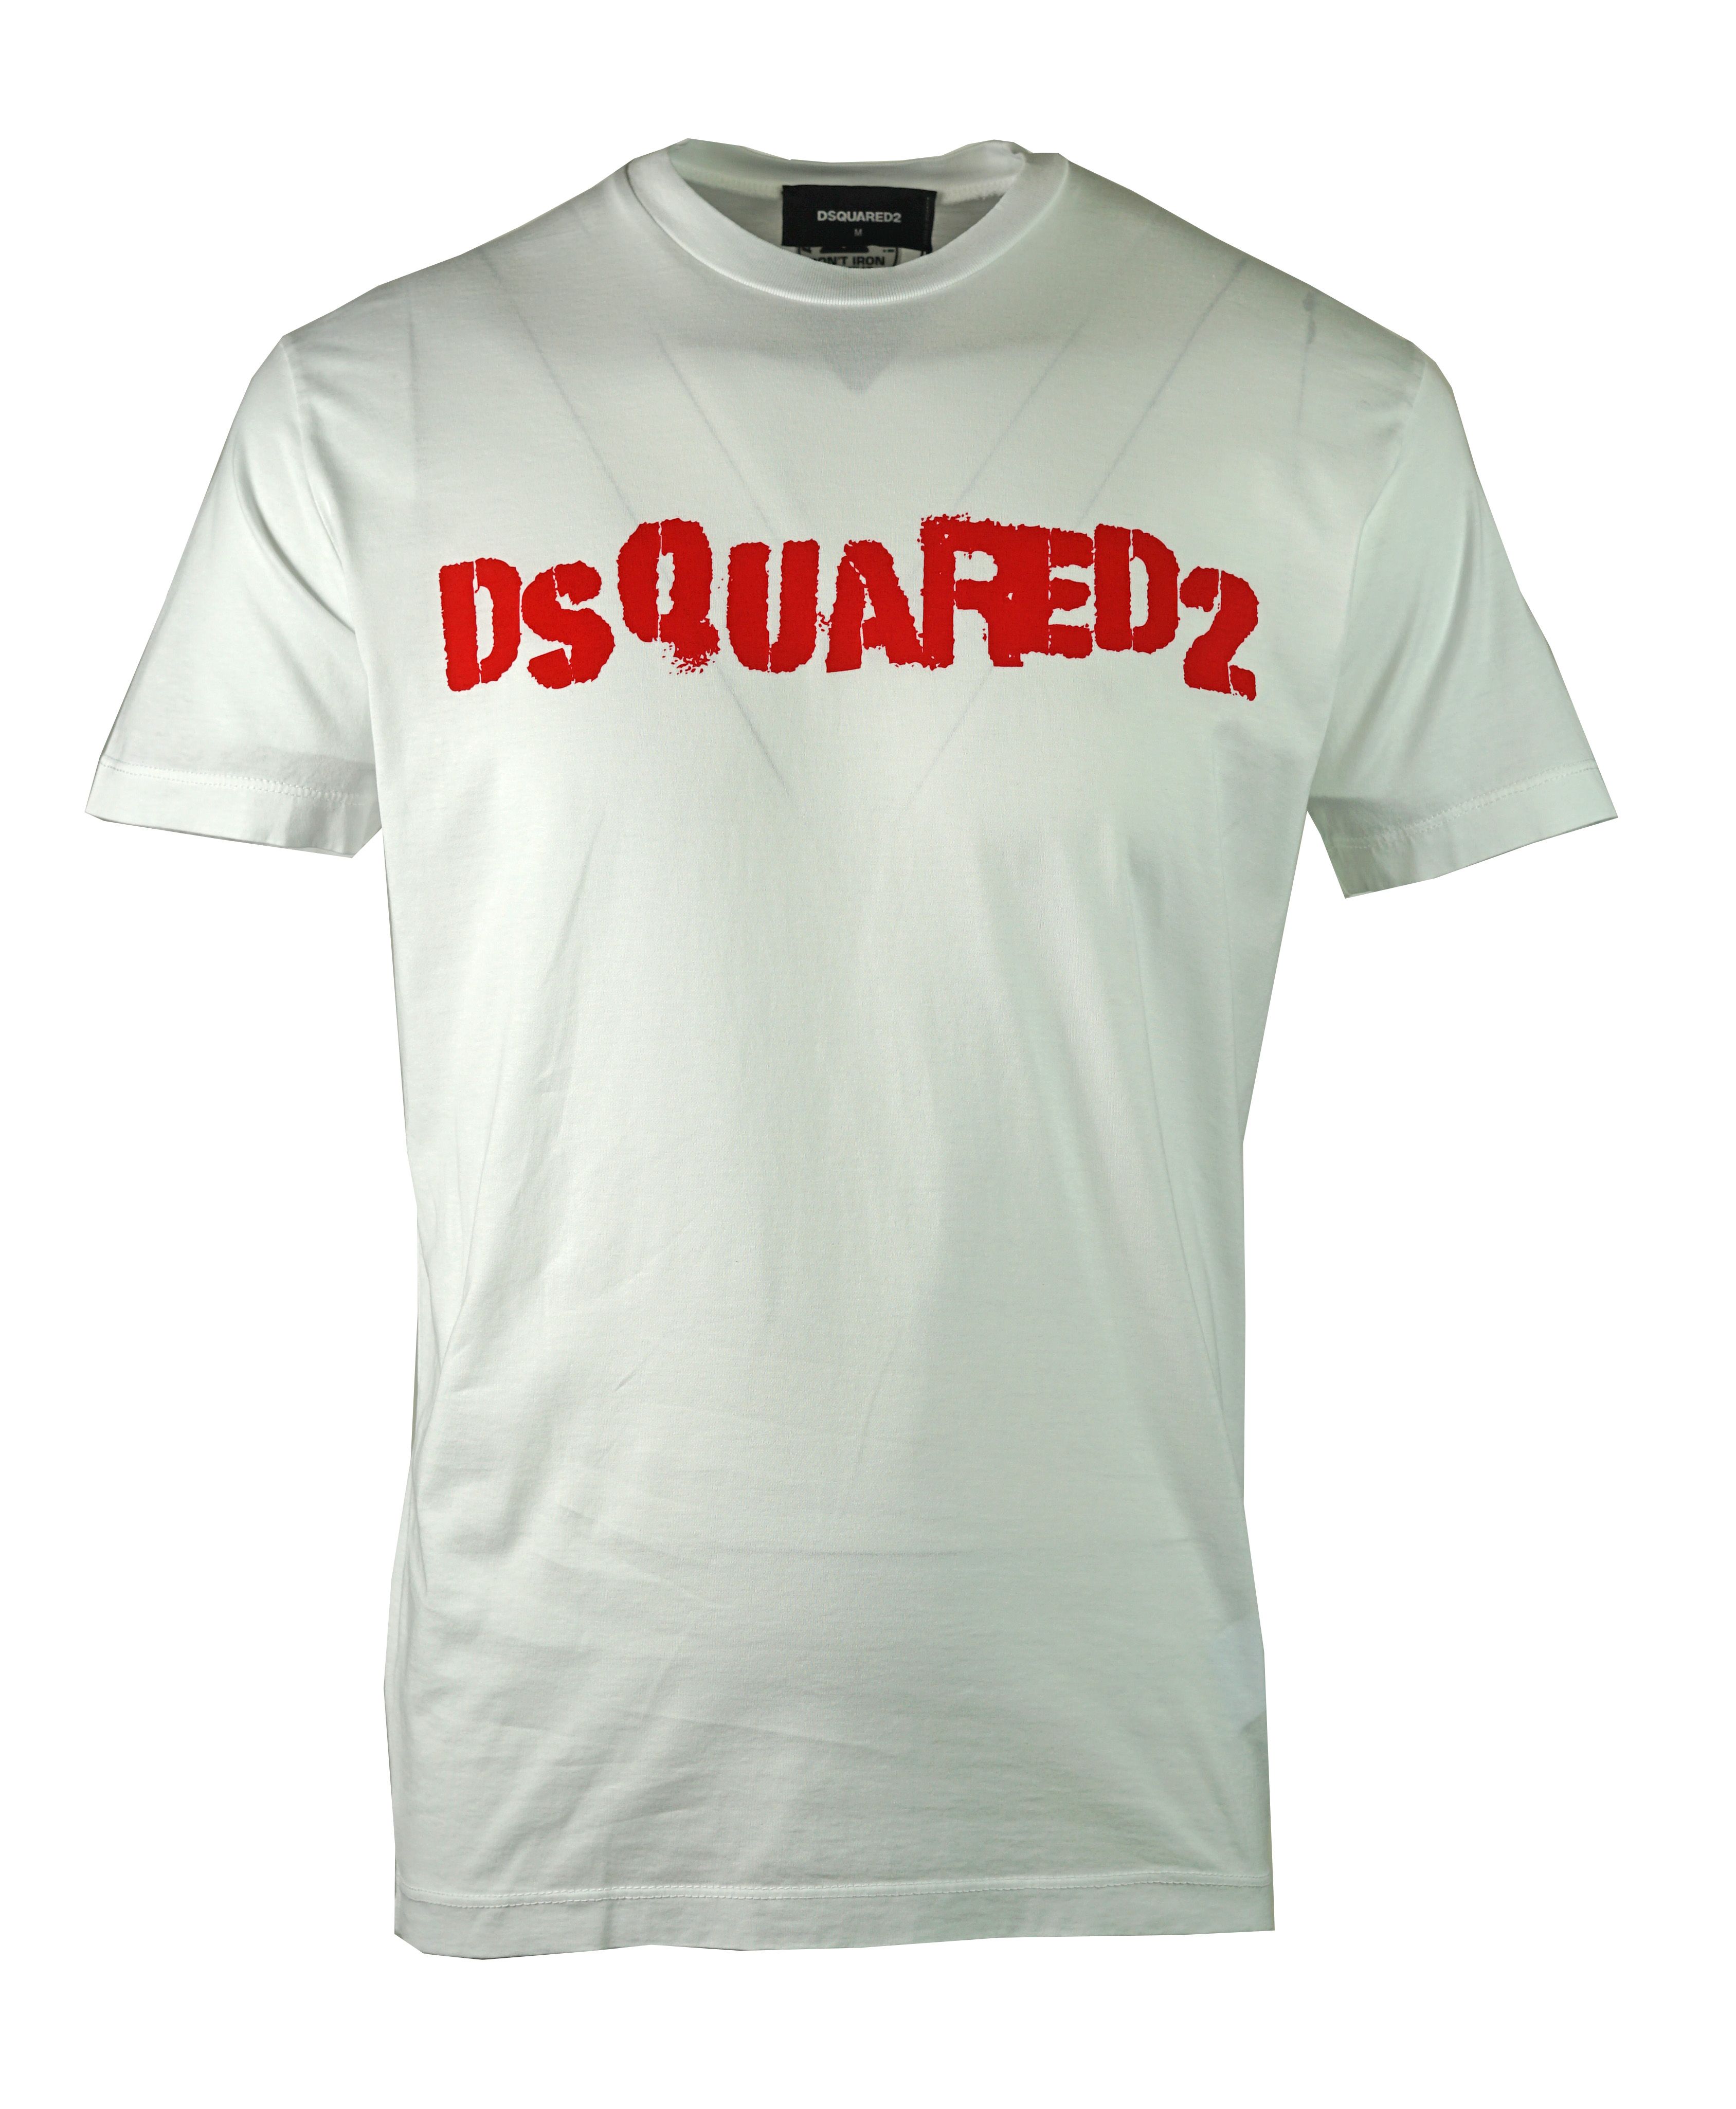 DSquared2 S74GD0494 S22427 100 T-Shirt. Round Crew Neck Tee. 100% Cotton. Short Sleeves. Large Branded Print On The Front. Ribbed Neck and Sleeve Endings